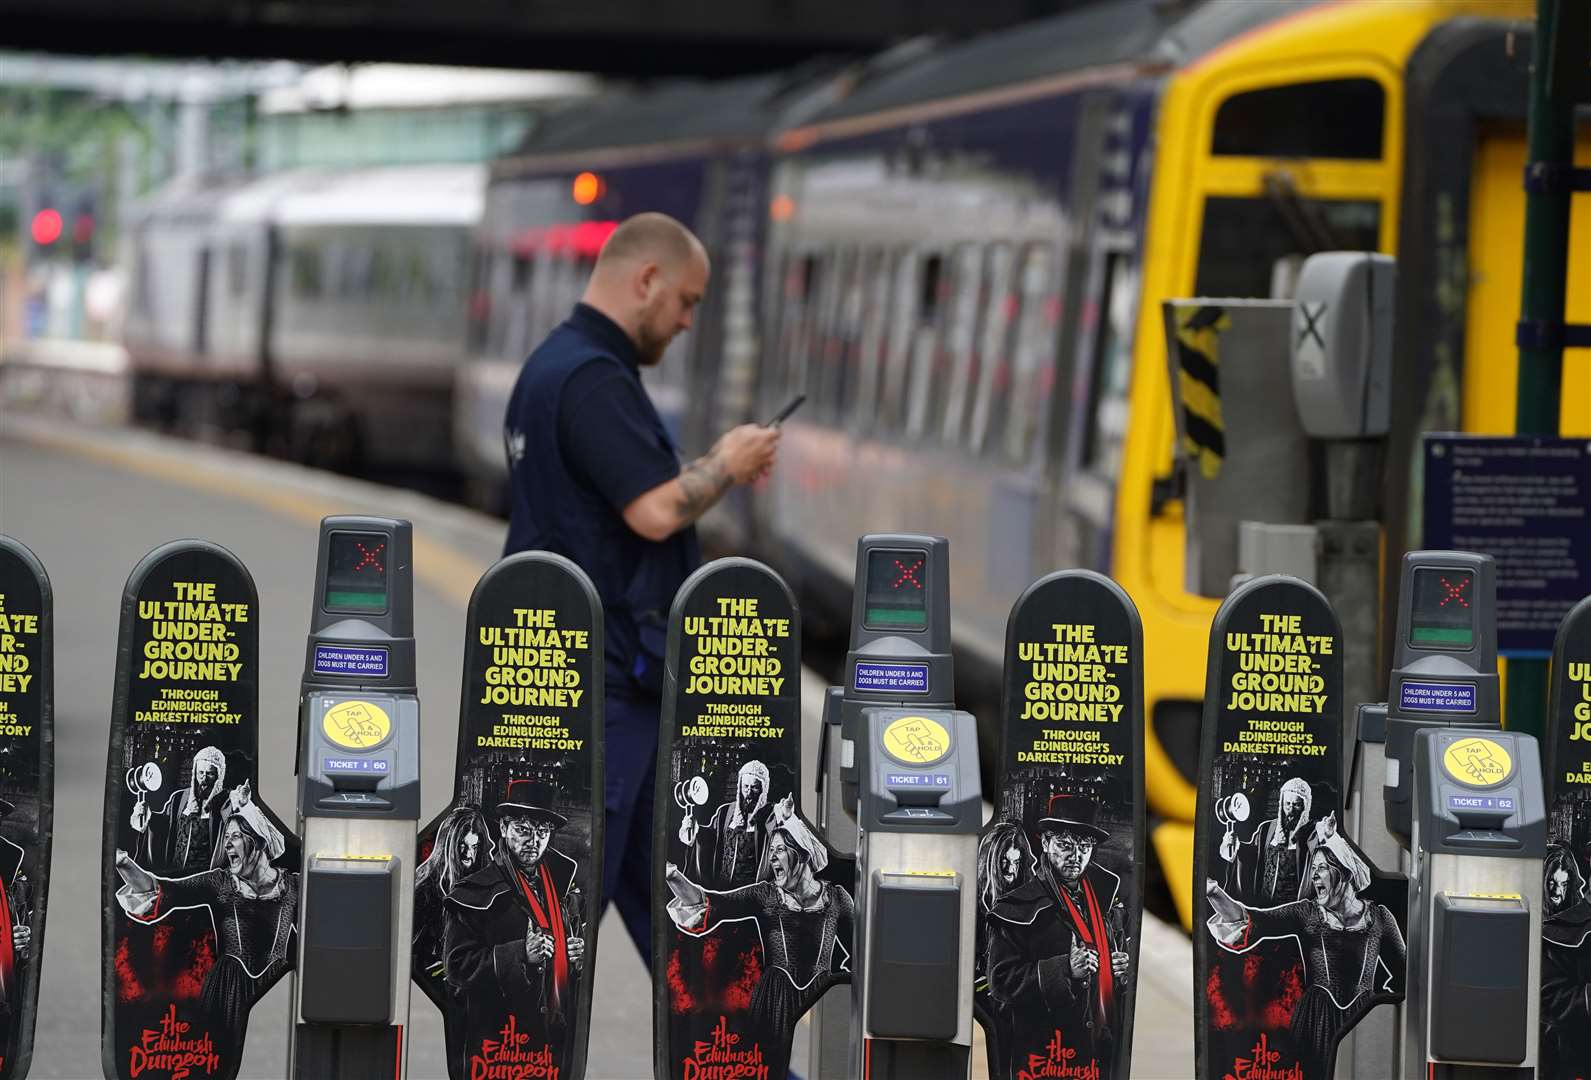 Ticket barriers at Waverley station in Edinburgh (Andrew Milligan/PA)